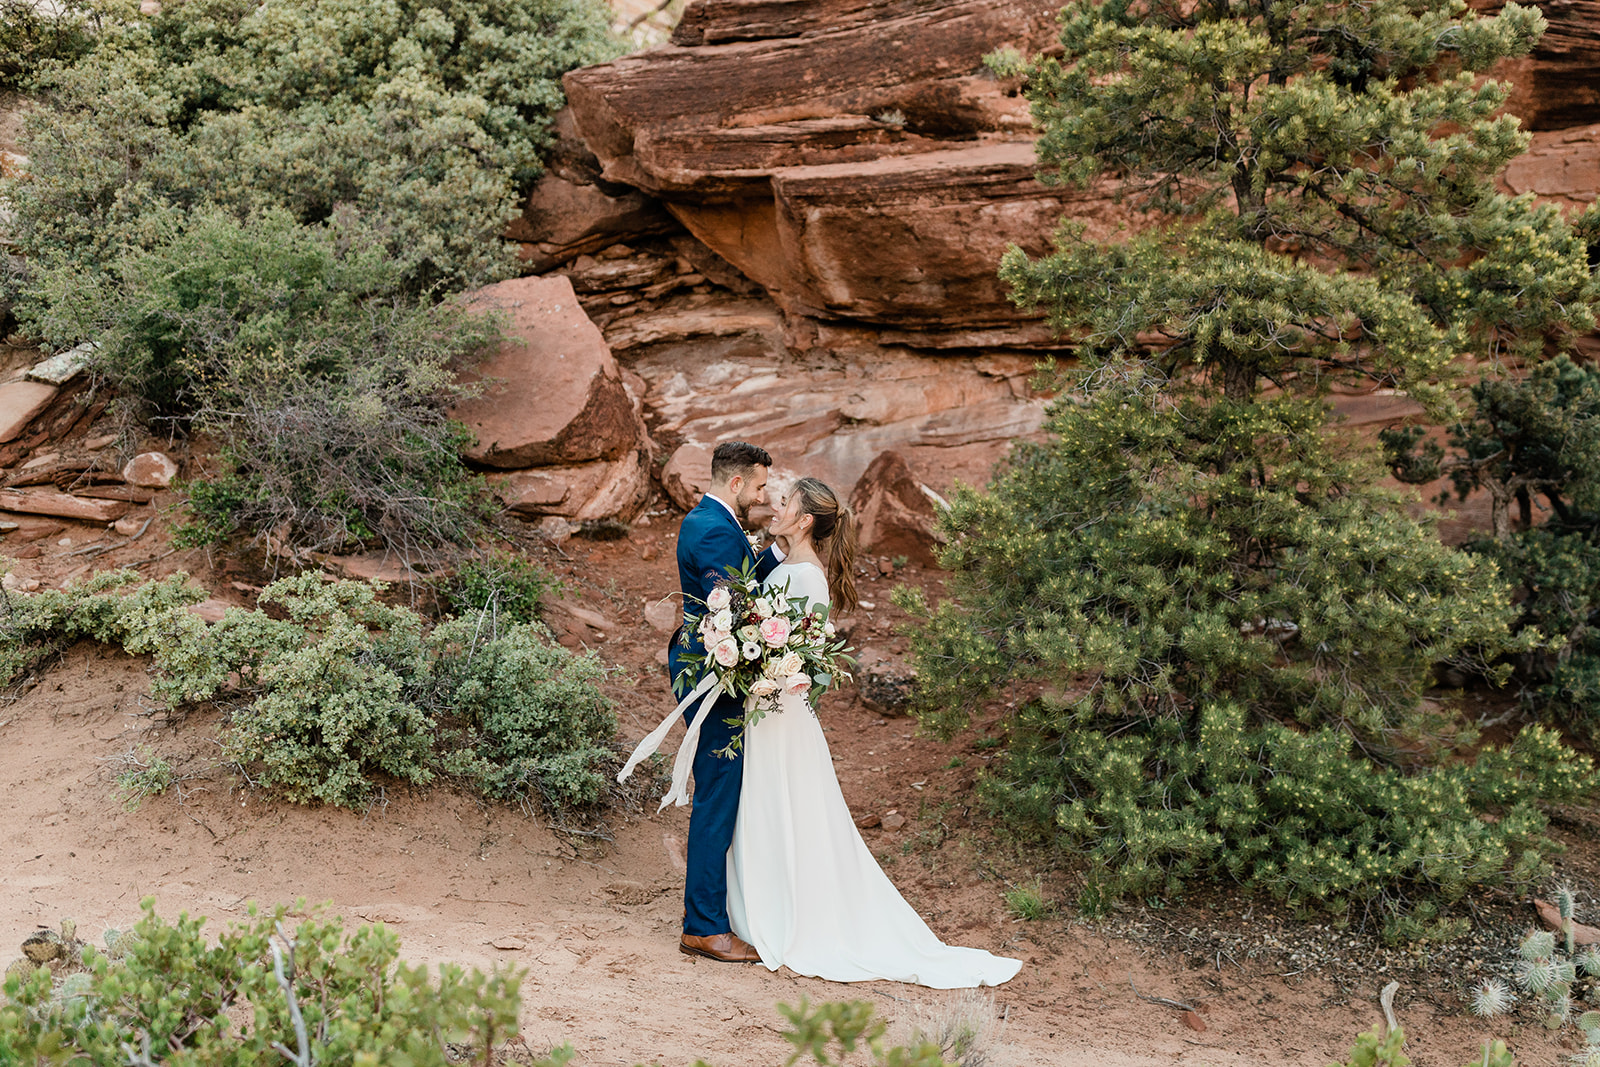 Nick and Kate kissing in front of red sandstone rocks in Zion